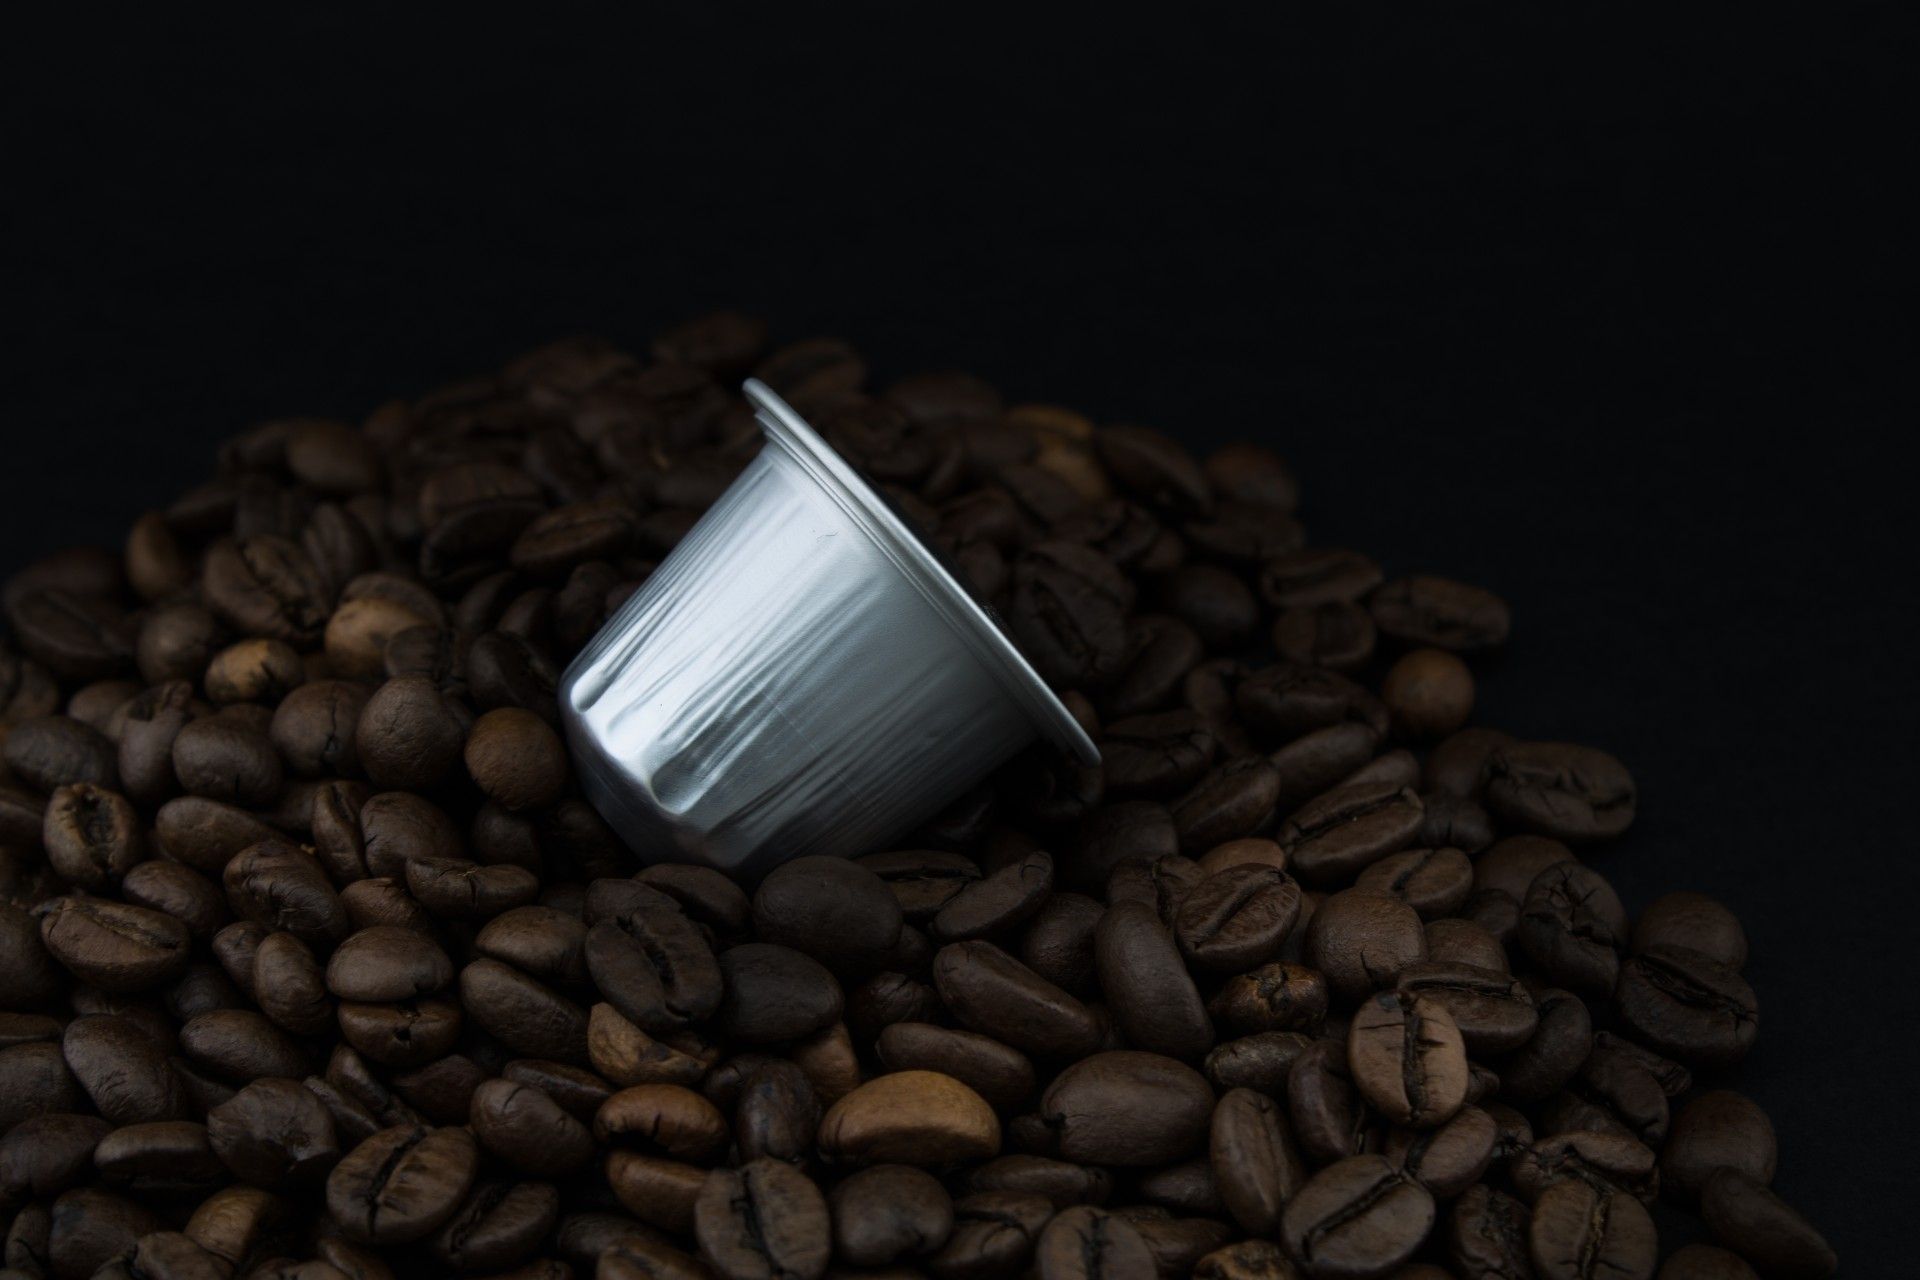 Silver coffee pod on pile of coffee beans - are k-cups recyclable